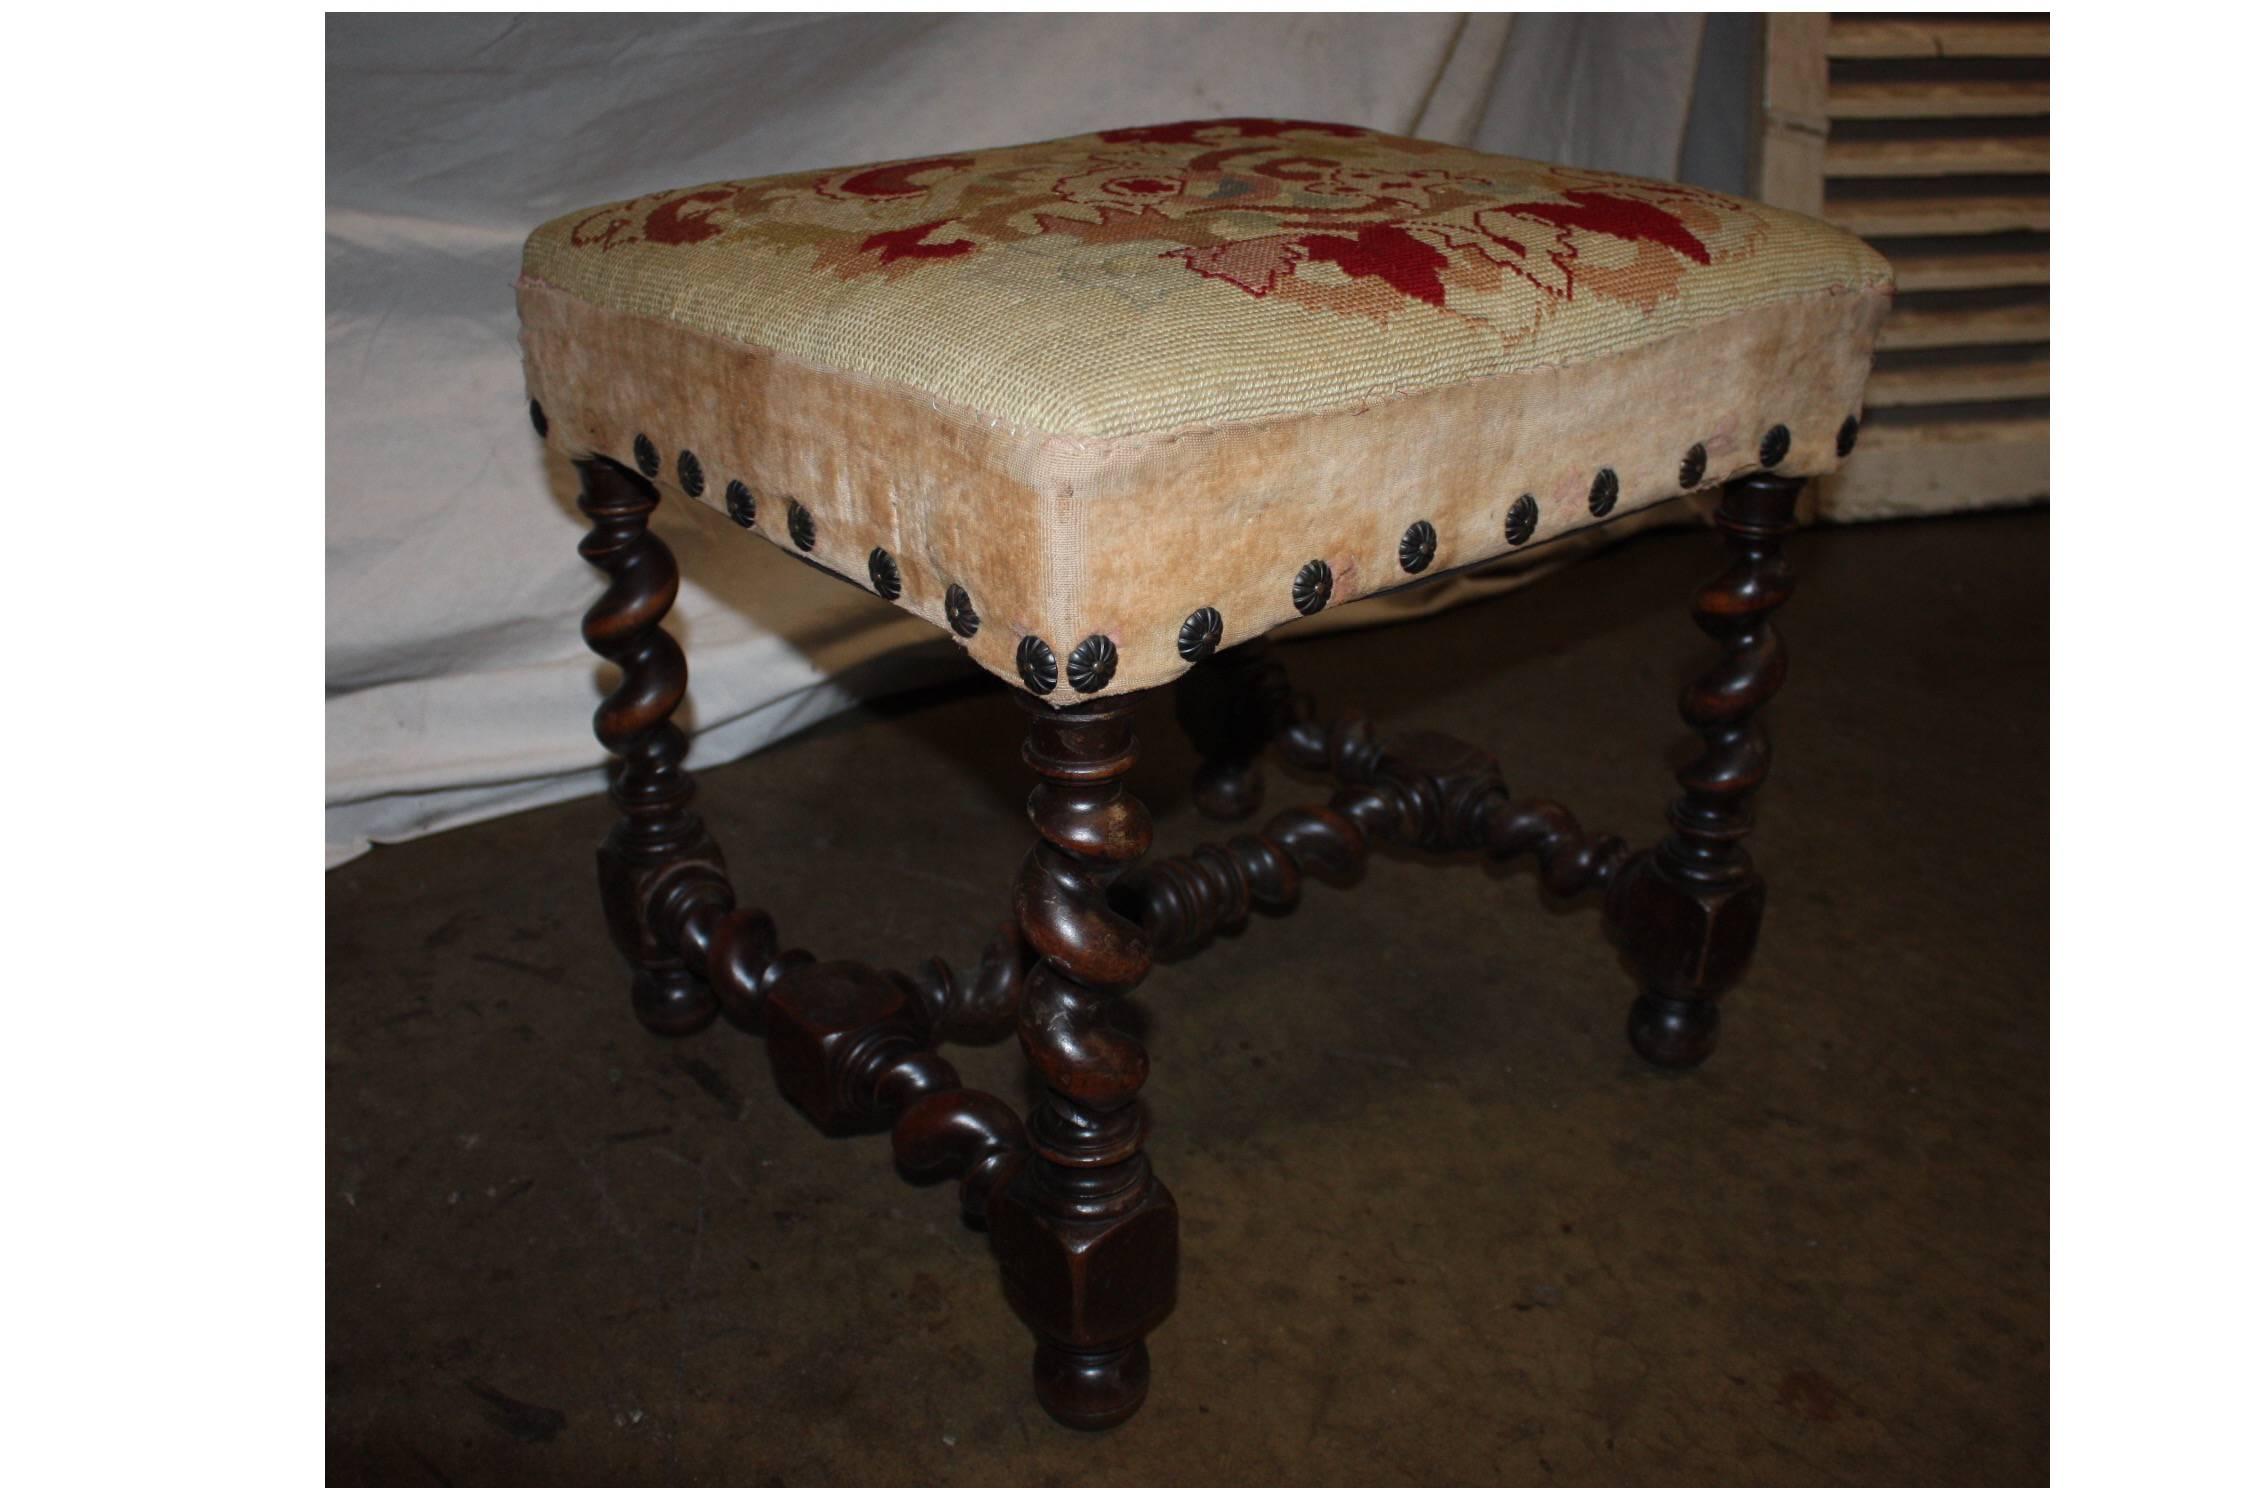 18th century French stool with a needle point work.